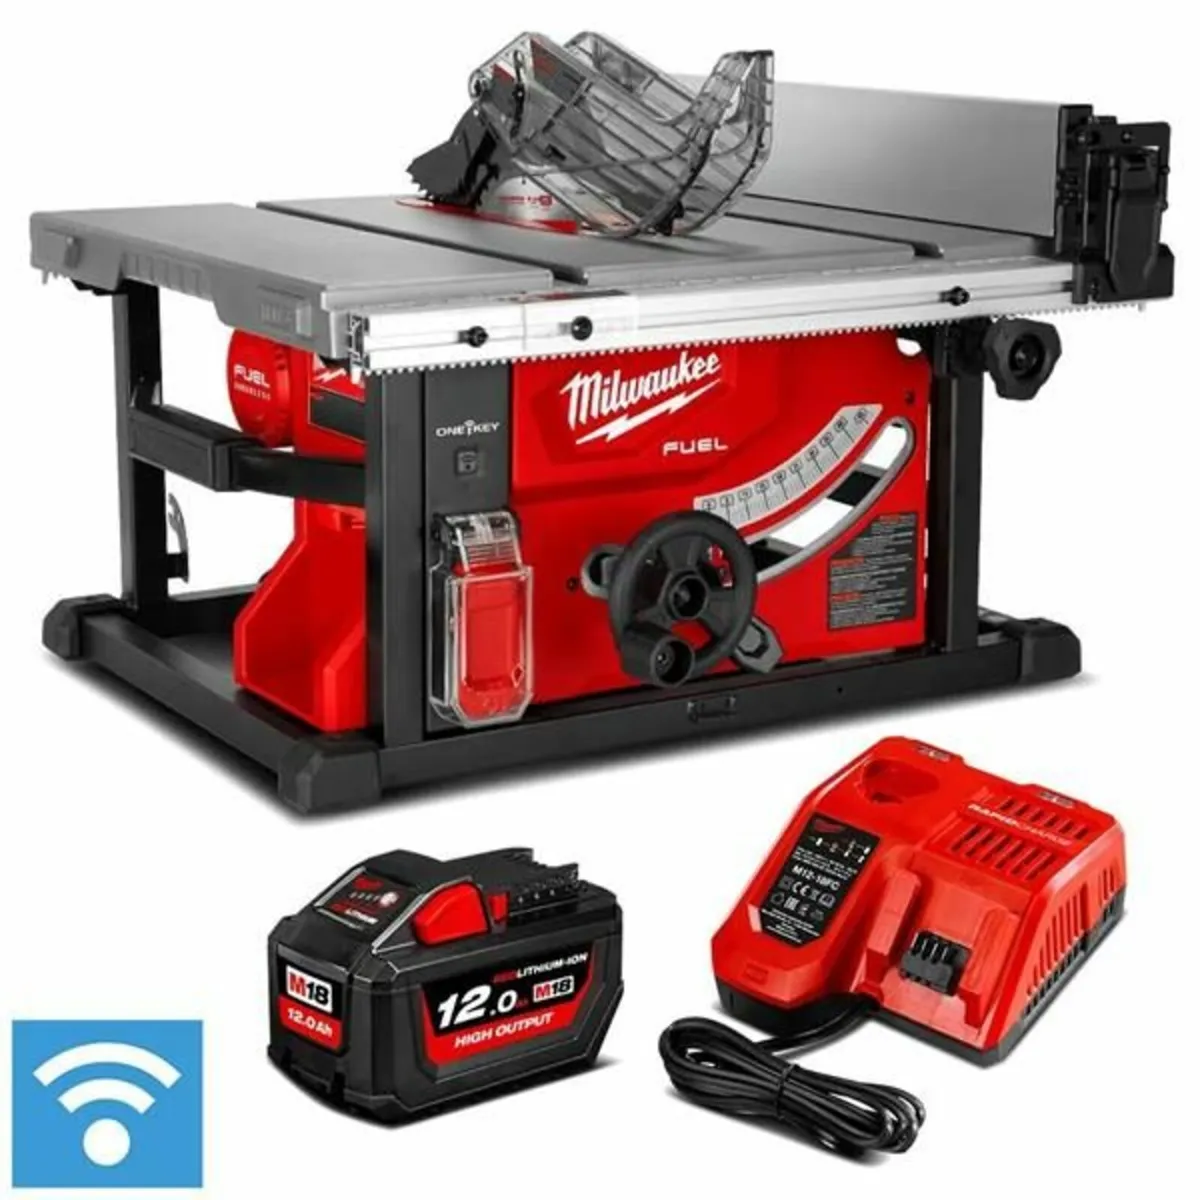 MILWAUKEE M18FTS210-121 ONE-KEY 210MM TABLE SAW (1